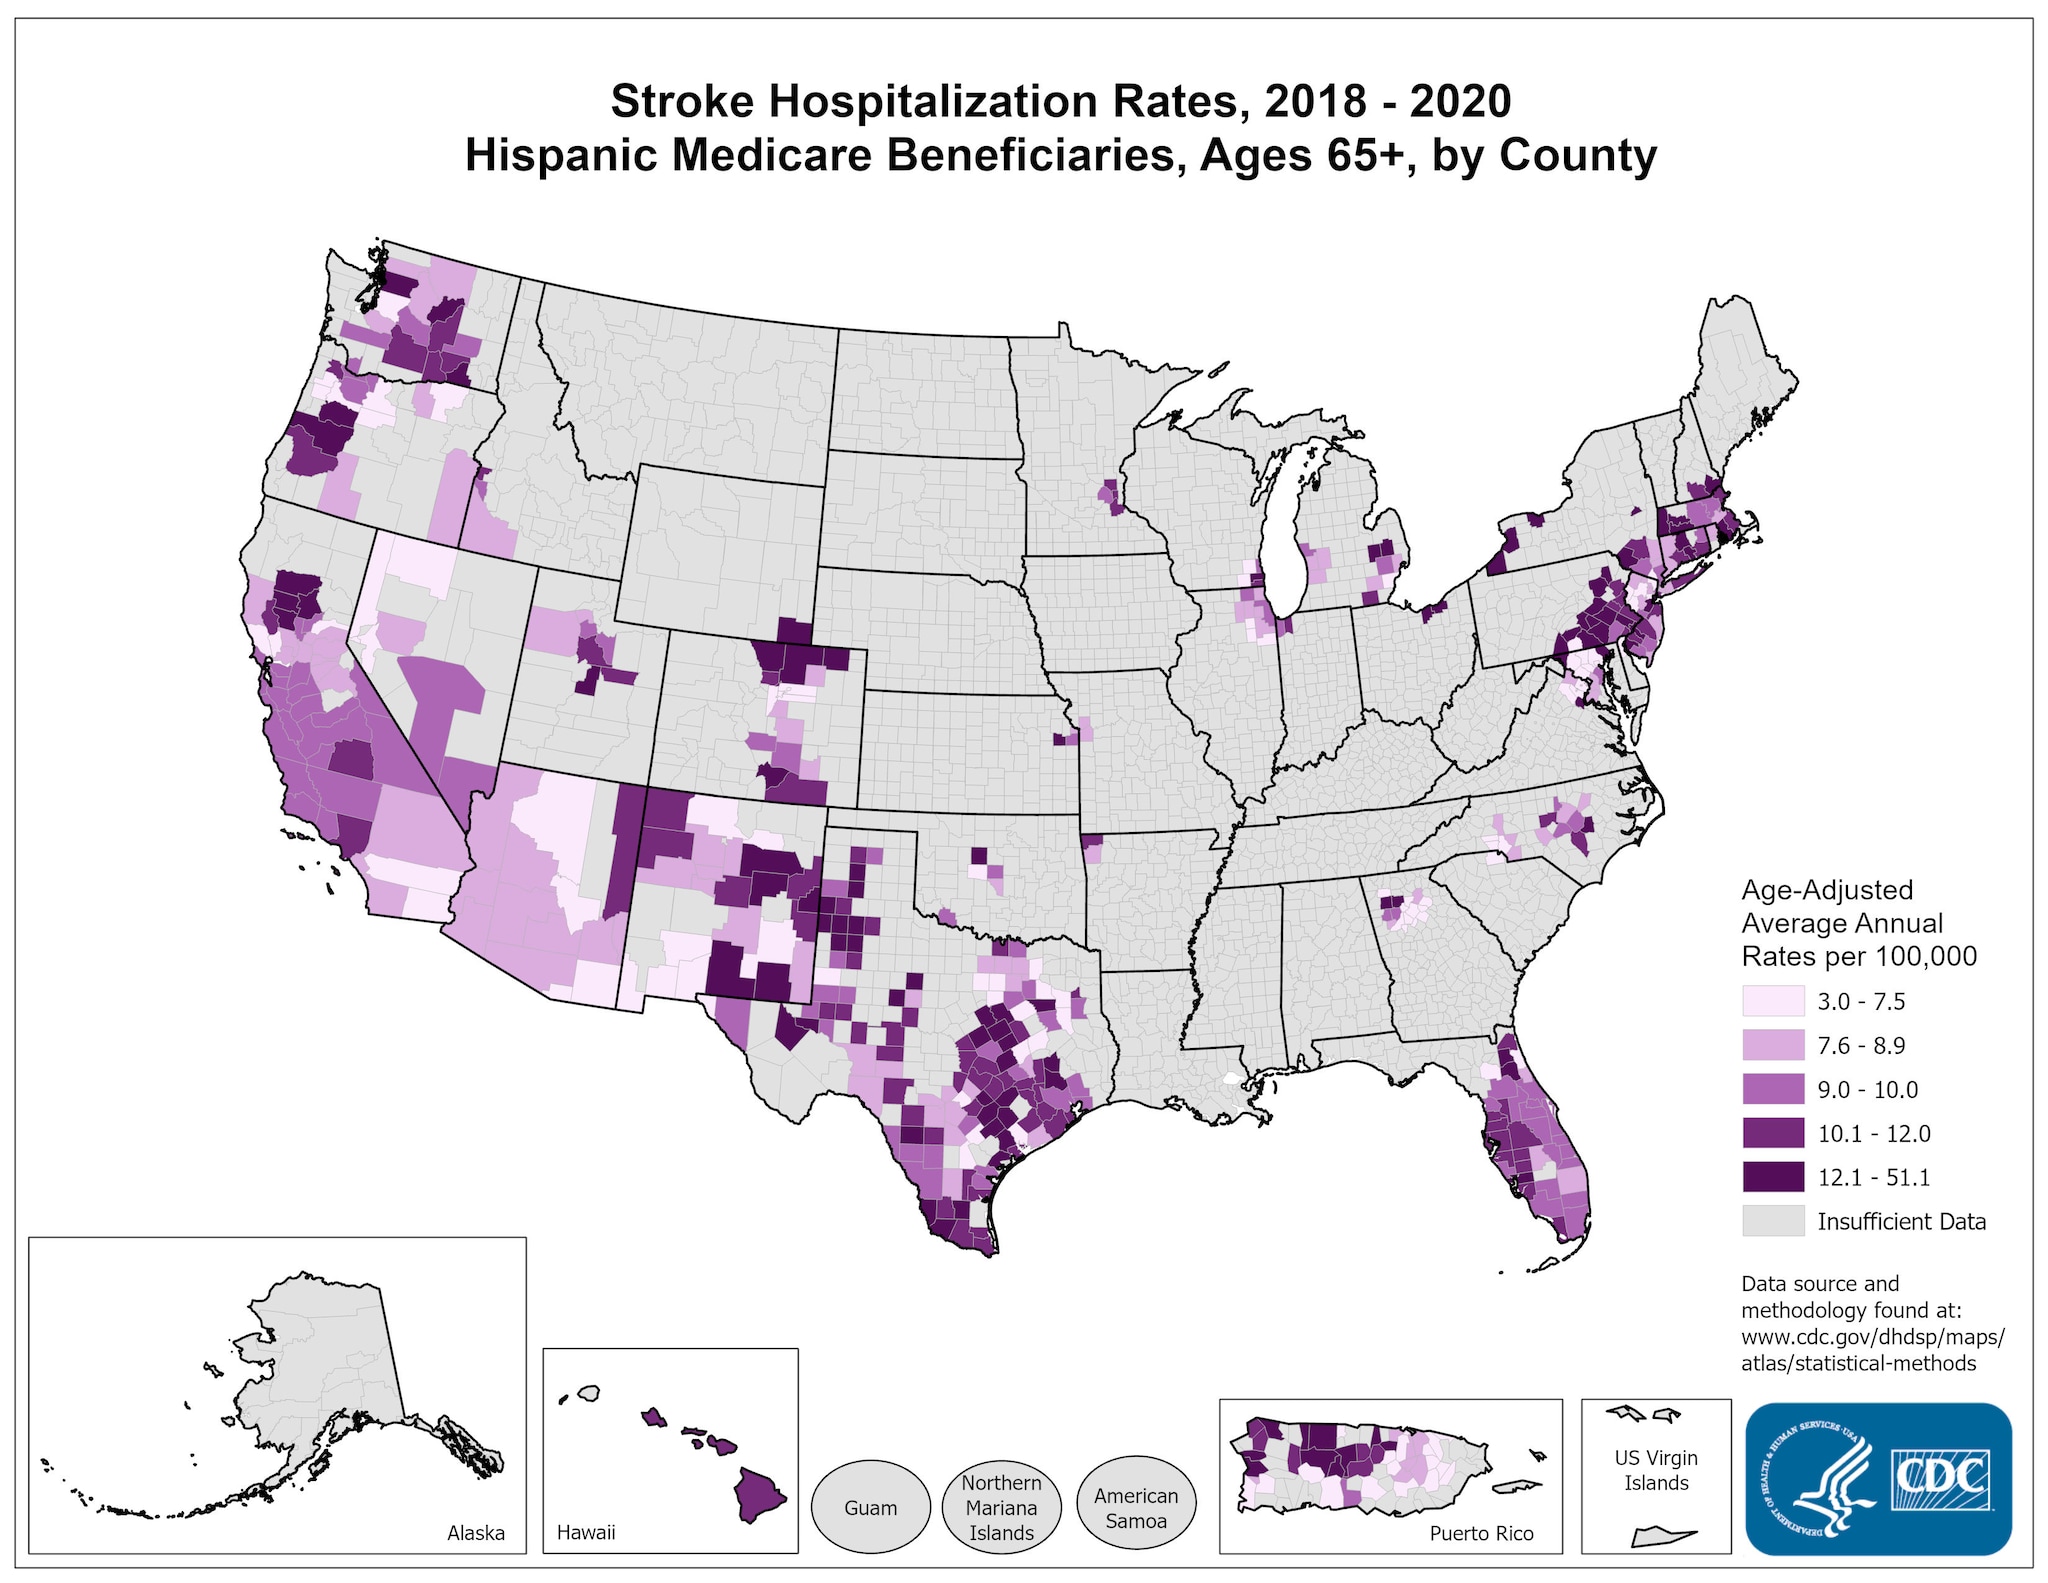 Stroke Hospitalization Rates for 2018 through 2020 for Hispanics Aged 65 Years and Older by County